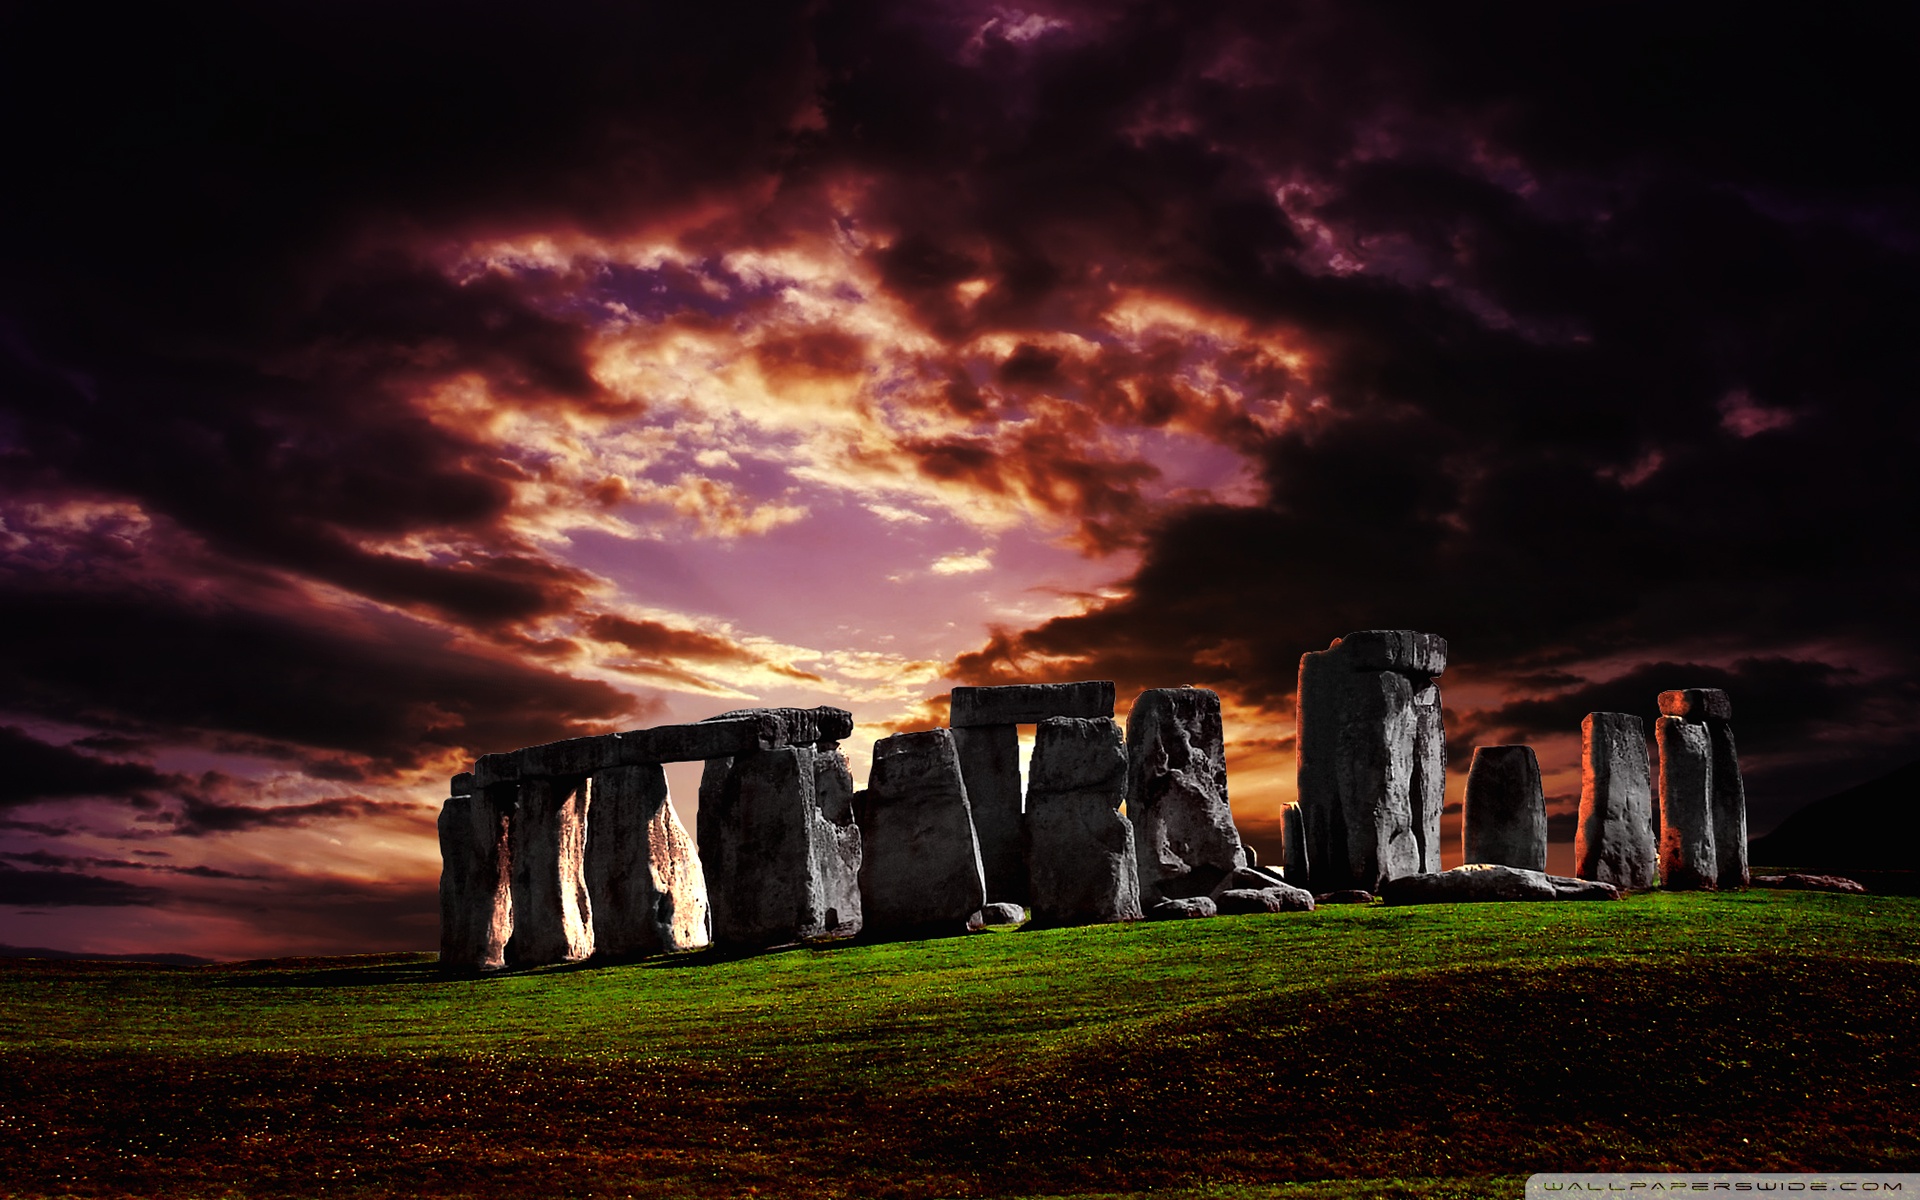 Information About Wiltshire Or Even Videos Related To Stonehenge